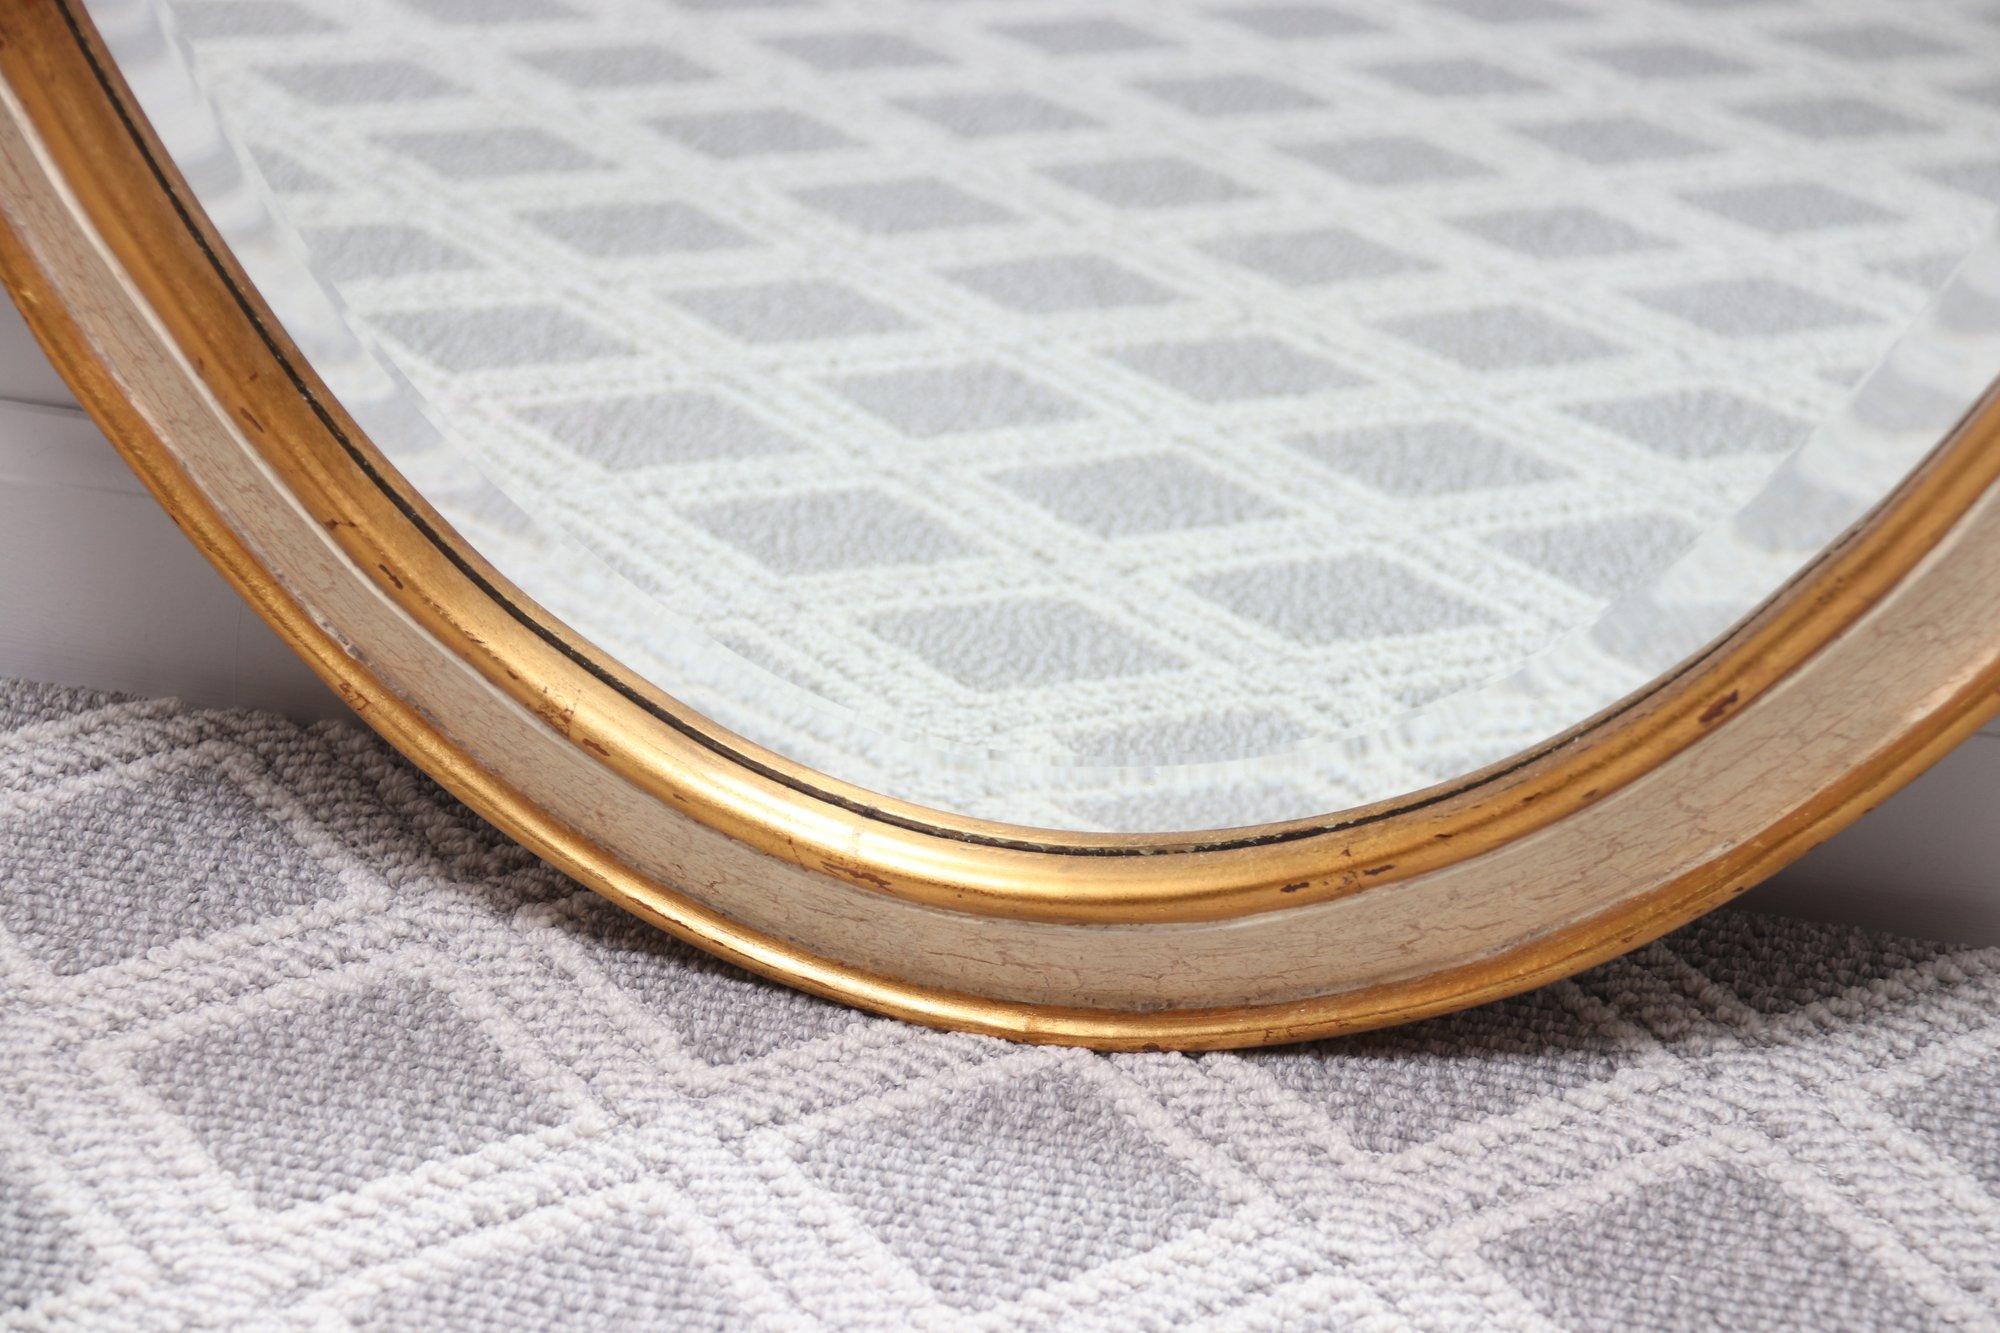 Oval Gold Painted Wall Mirror With Bow Finial